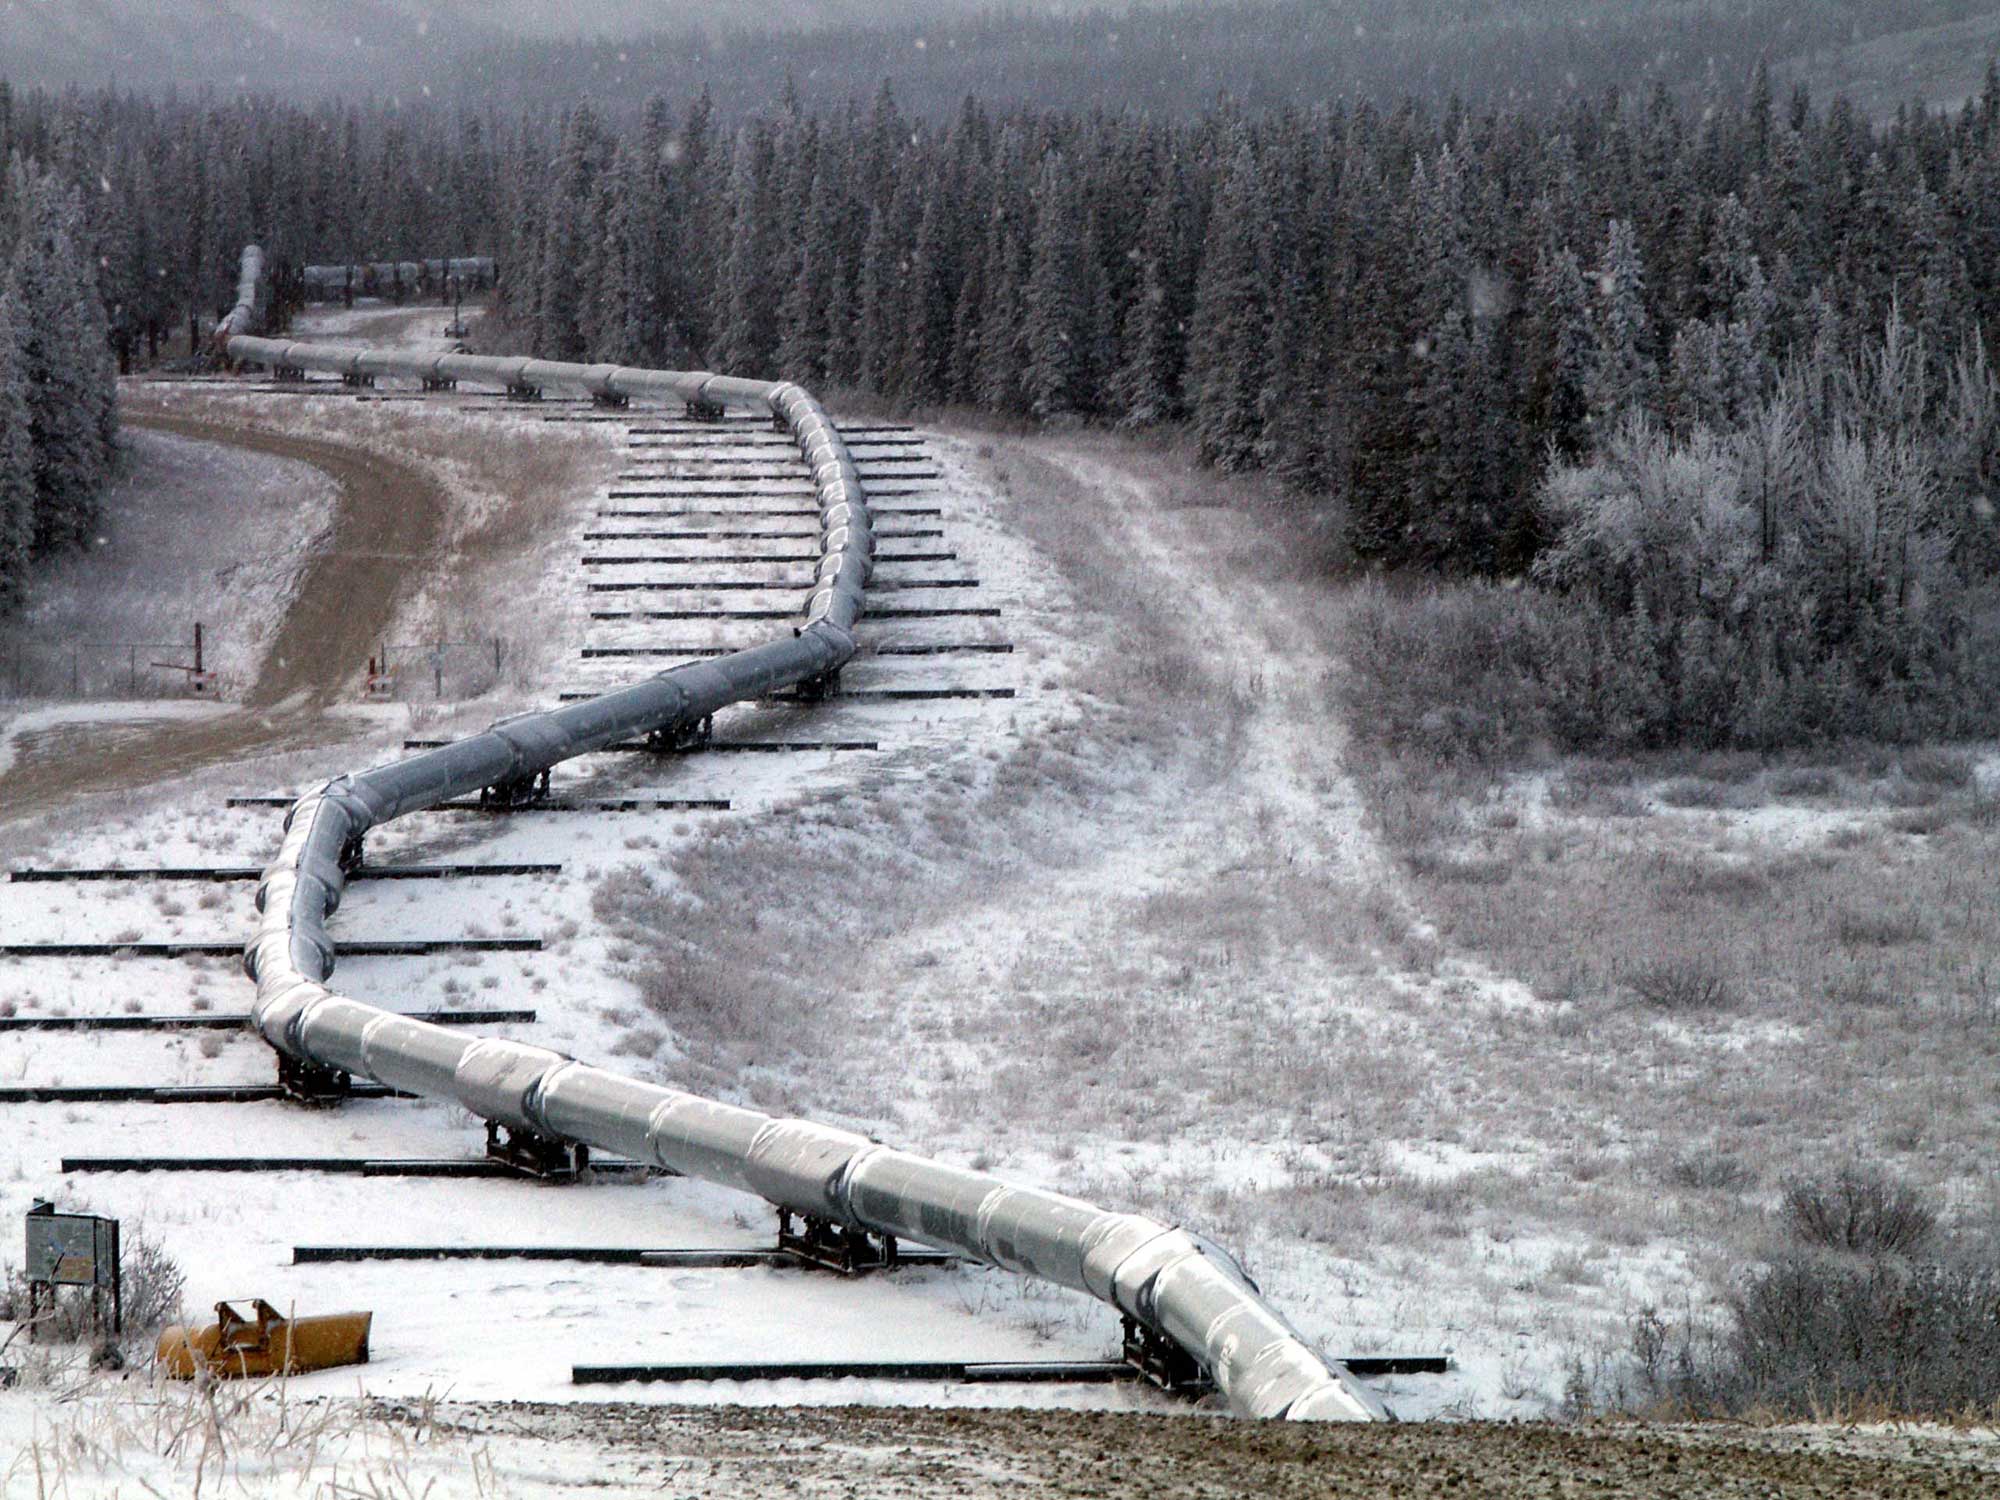 Photograph of the Trans-Alaska pipeline traversing the Denali fault. The photo shows a section of the pipeline supported by horizontal sliders that allow the pipeline to move when the ground shifts.